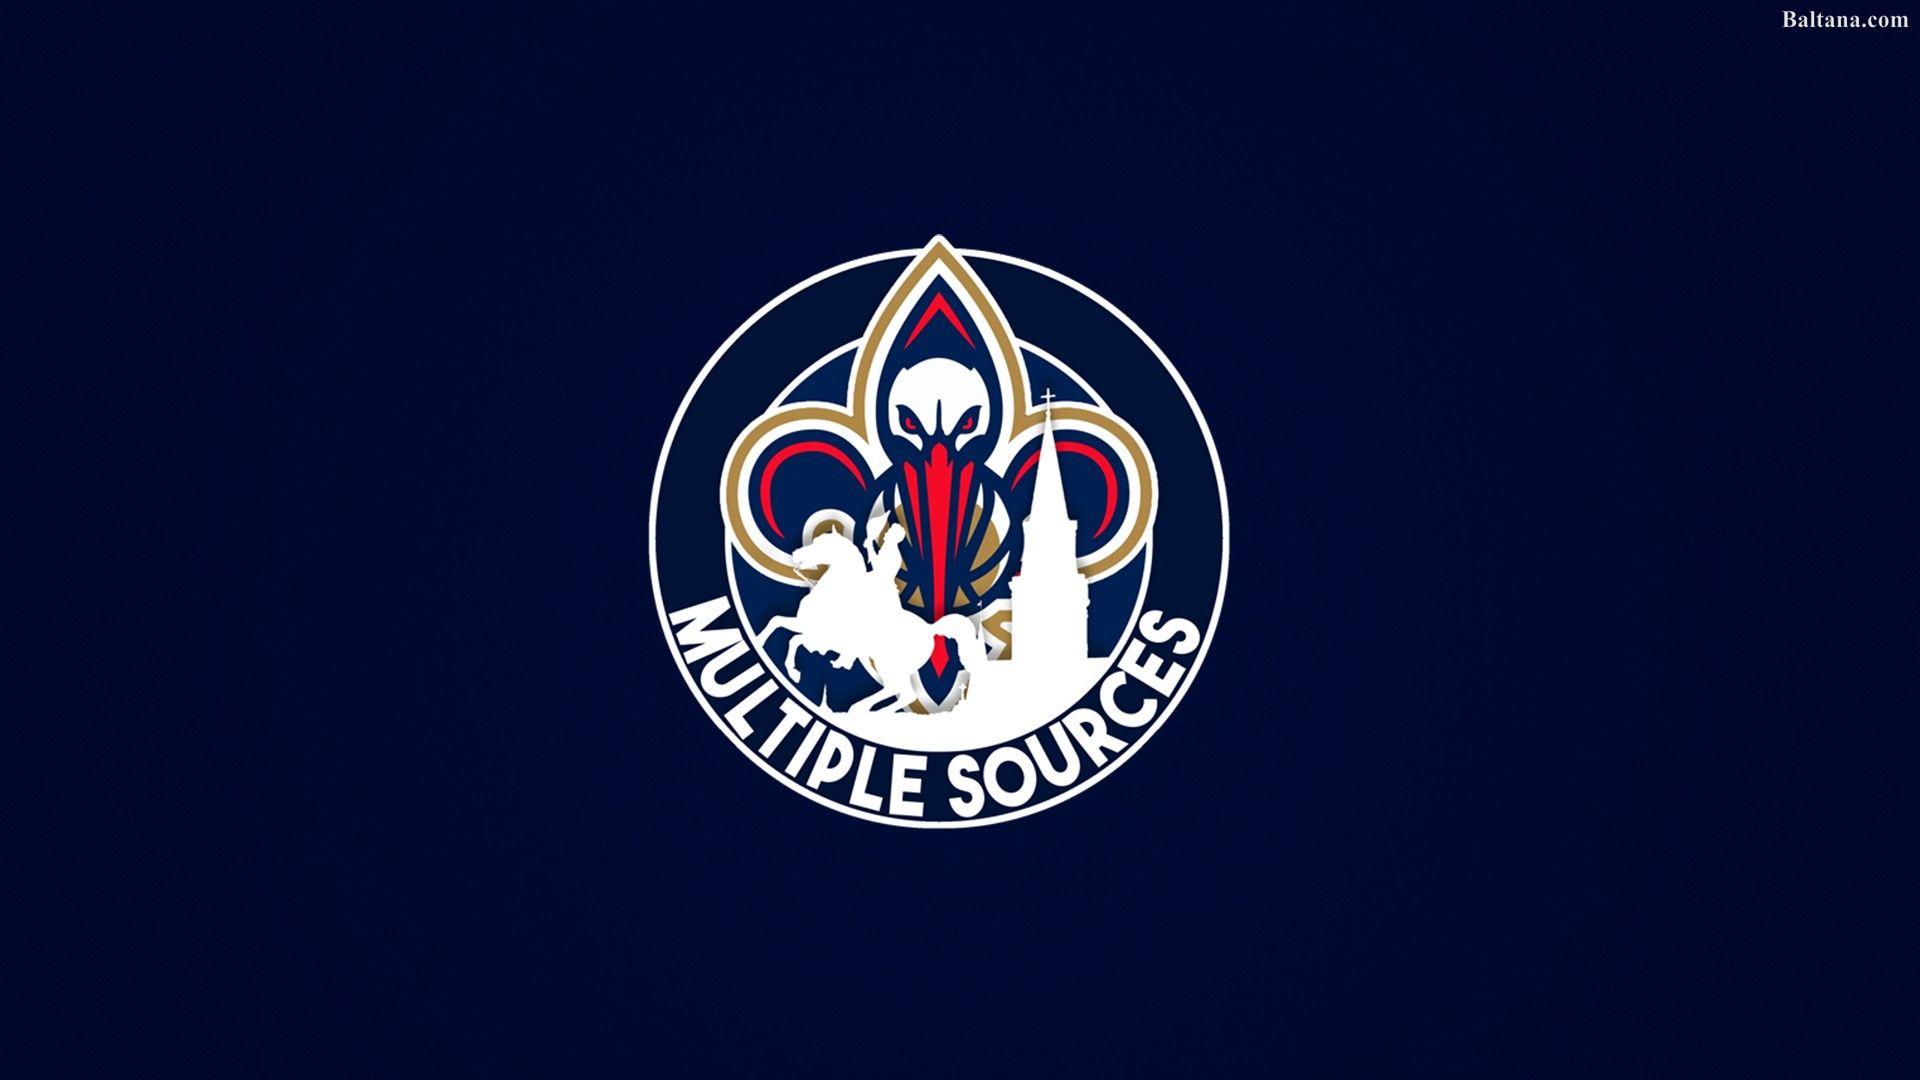 New Orleans Pelicans Wallpapers - Wallpaper Cave